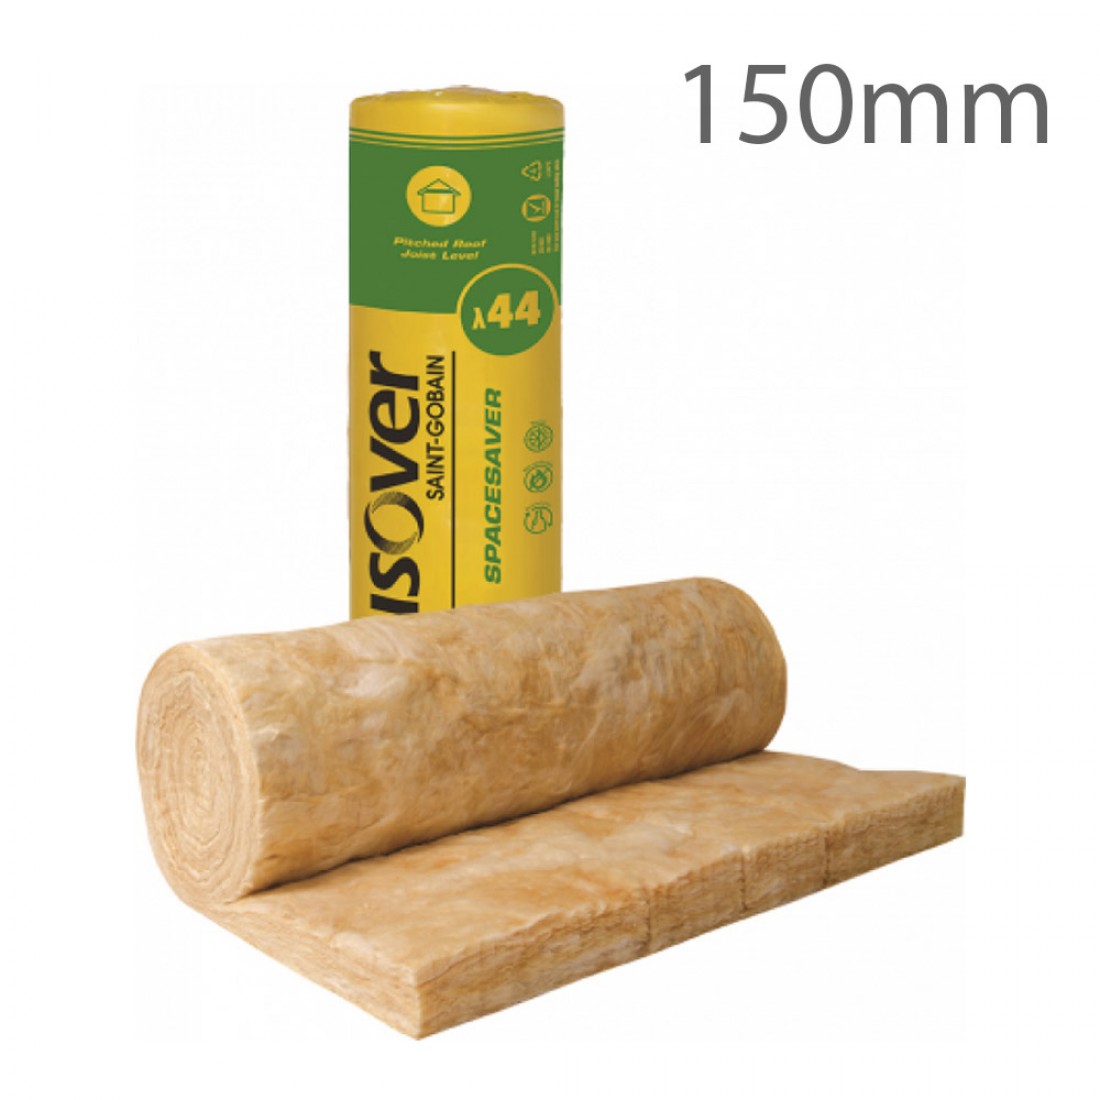 1286 Isover Spacesaver Insulation Roll 150mm 1100x1100 